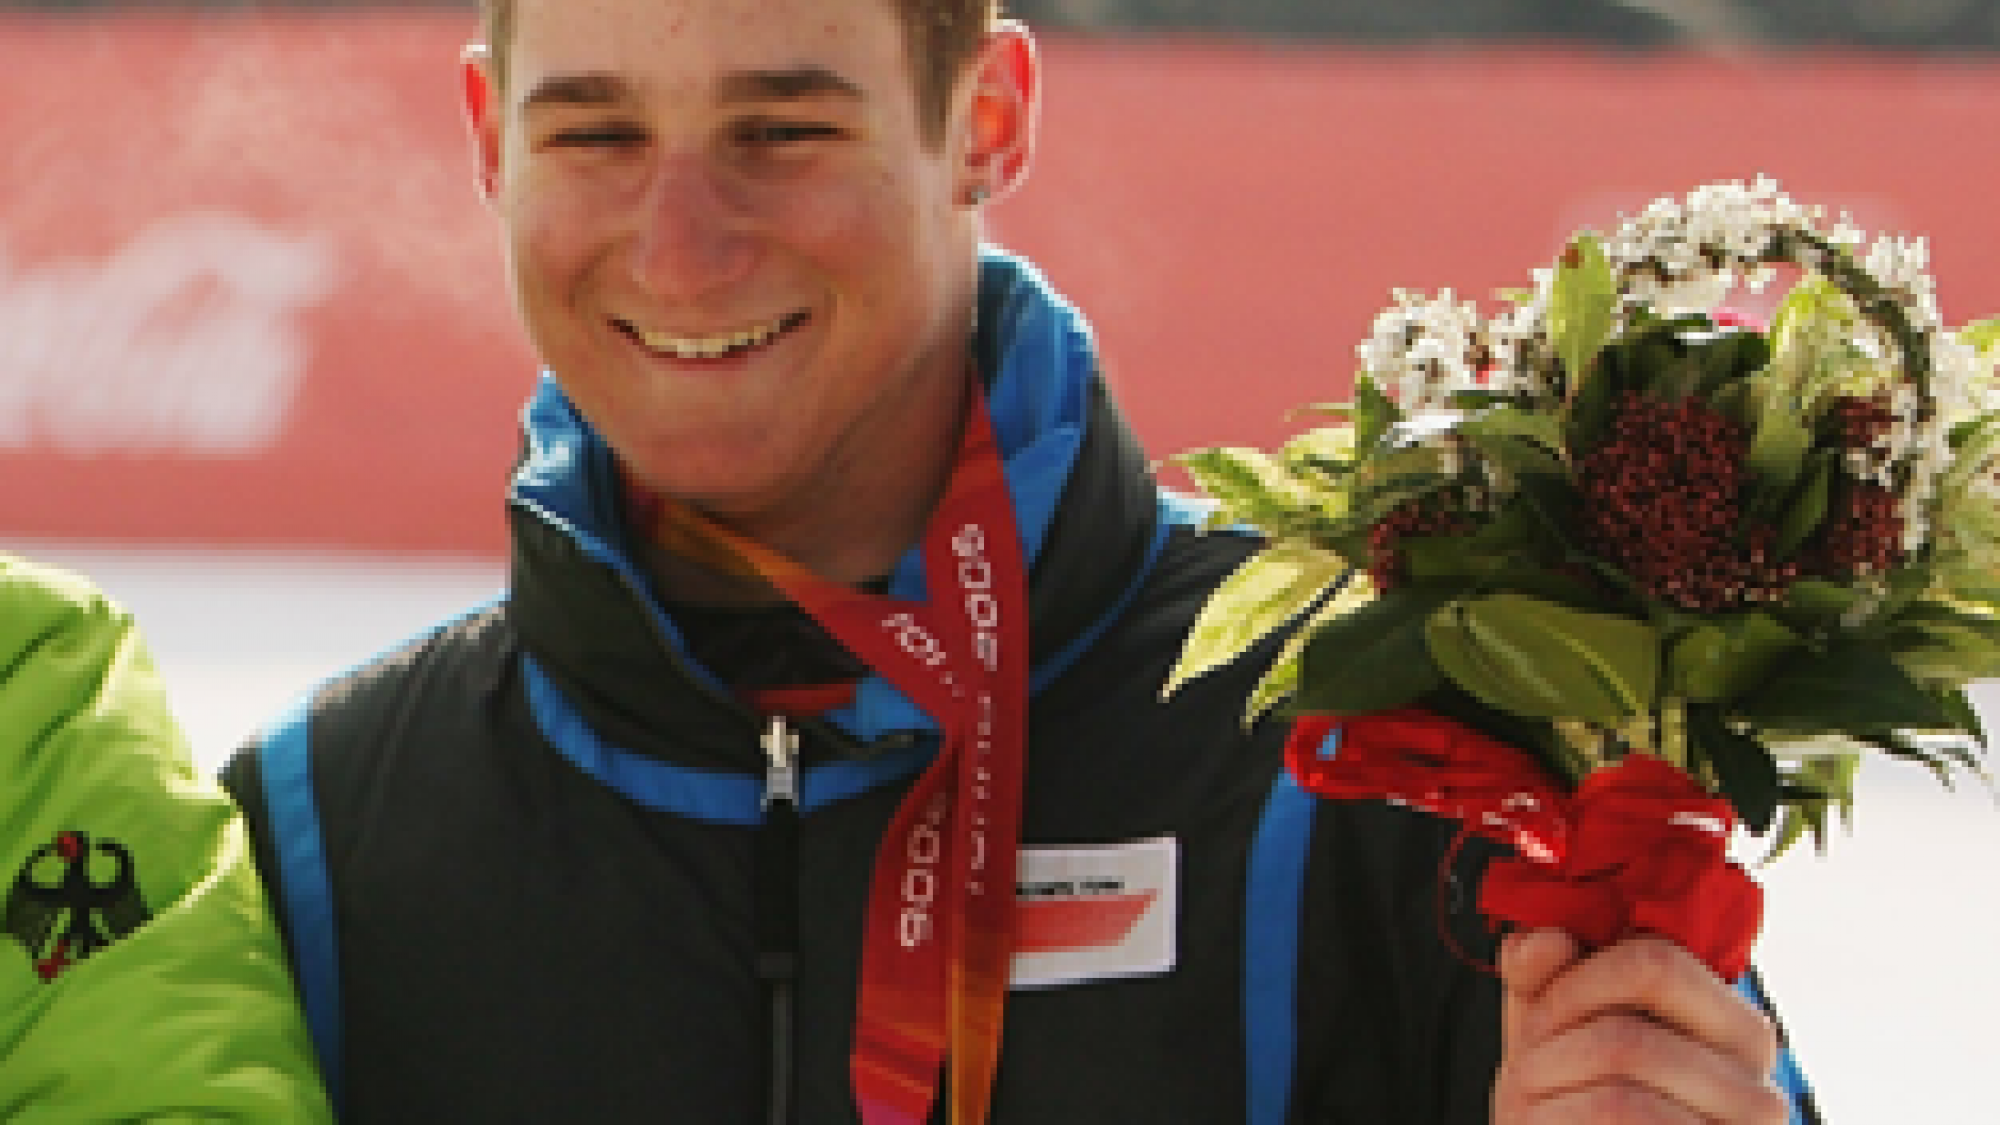 A picture of a man showing his bronze medal